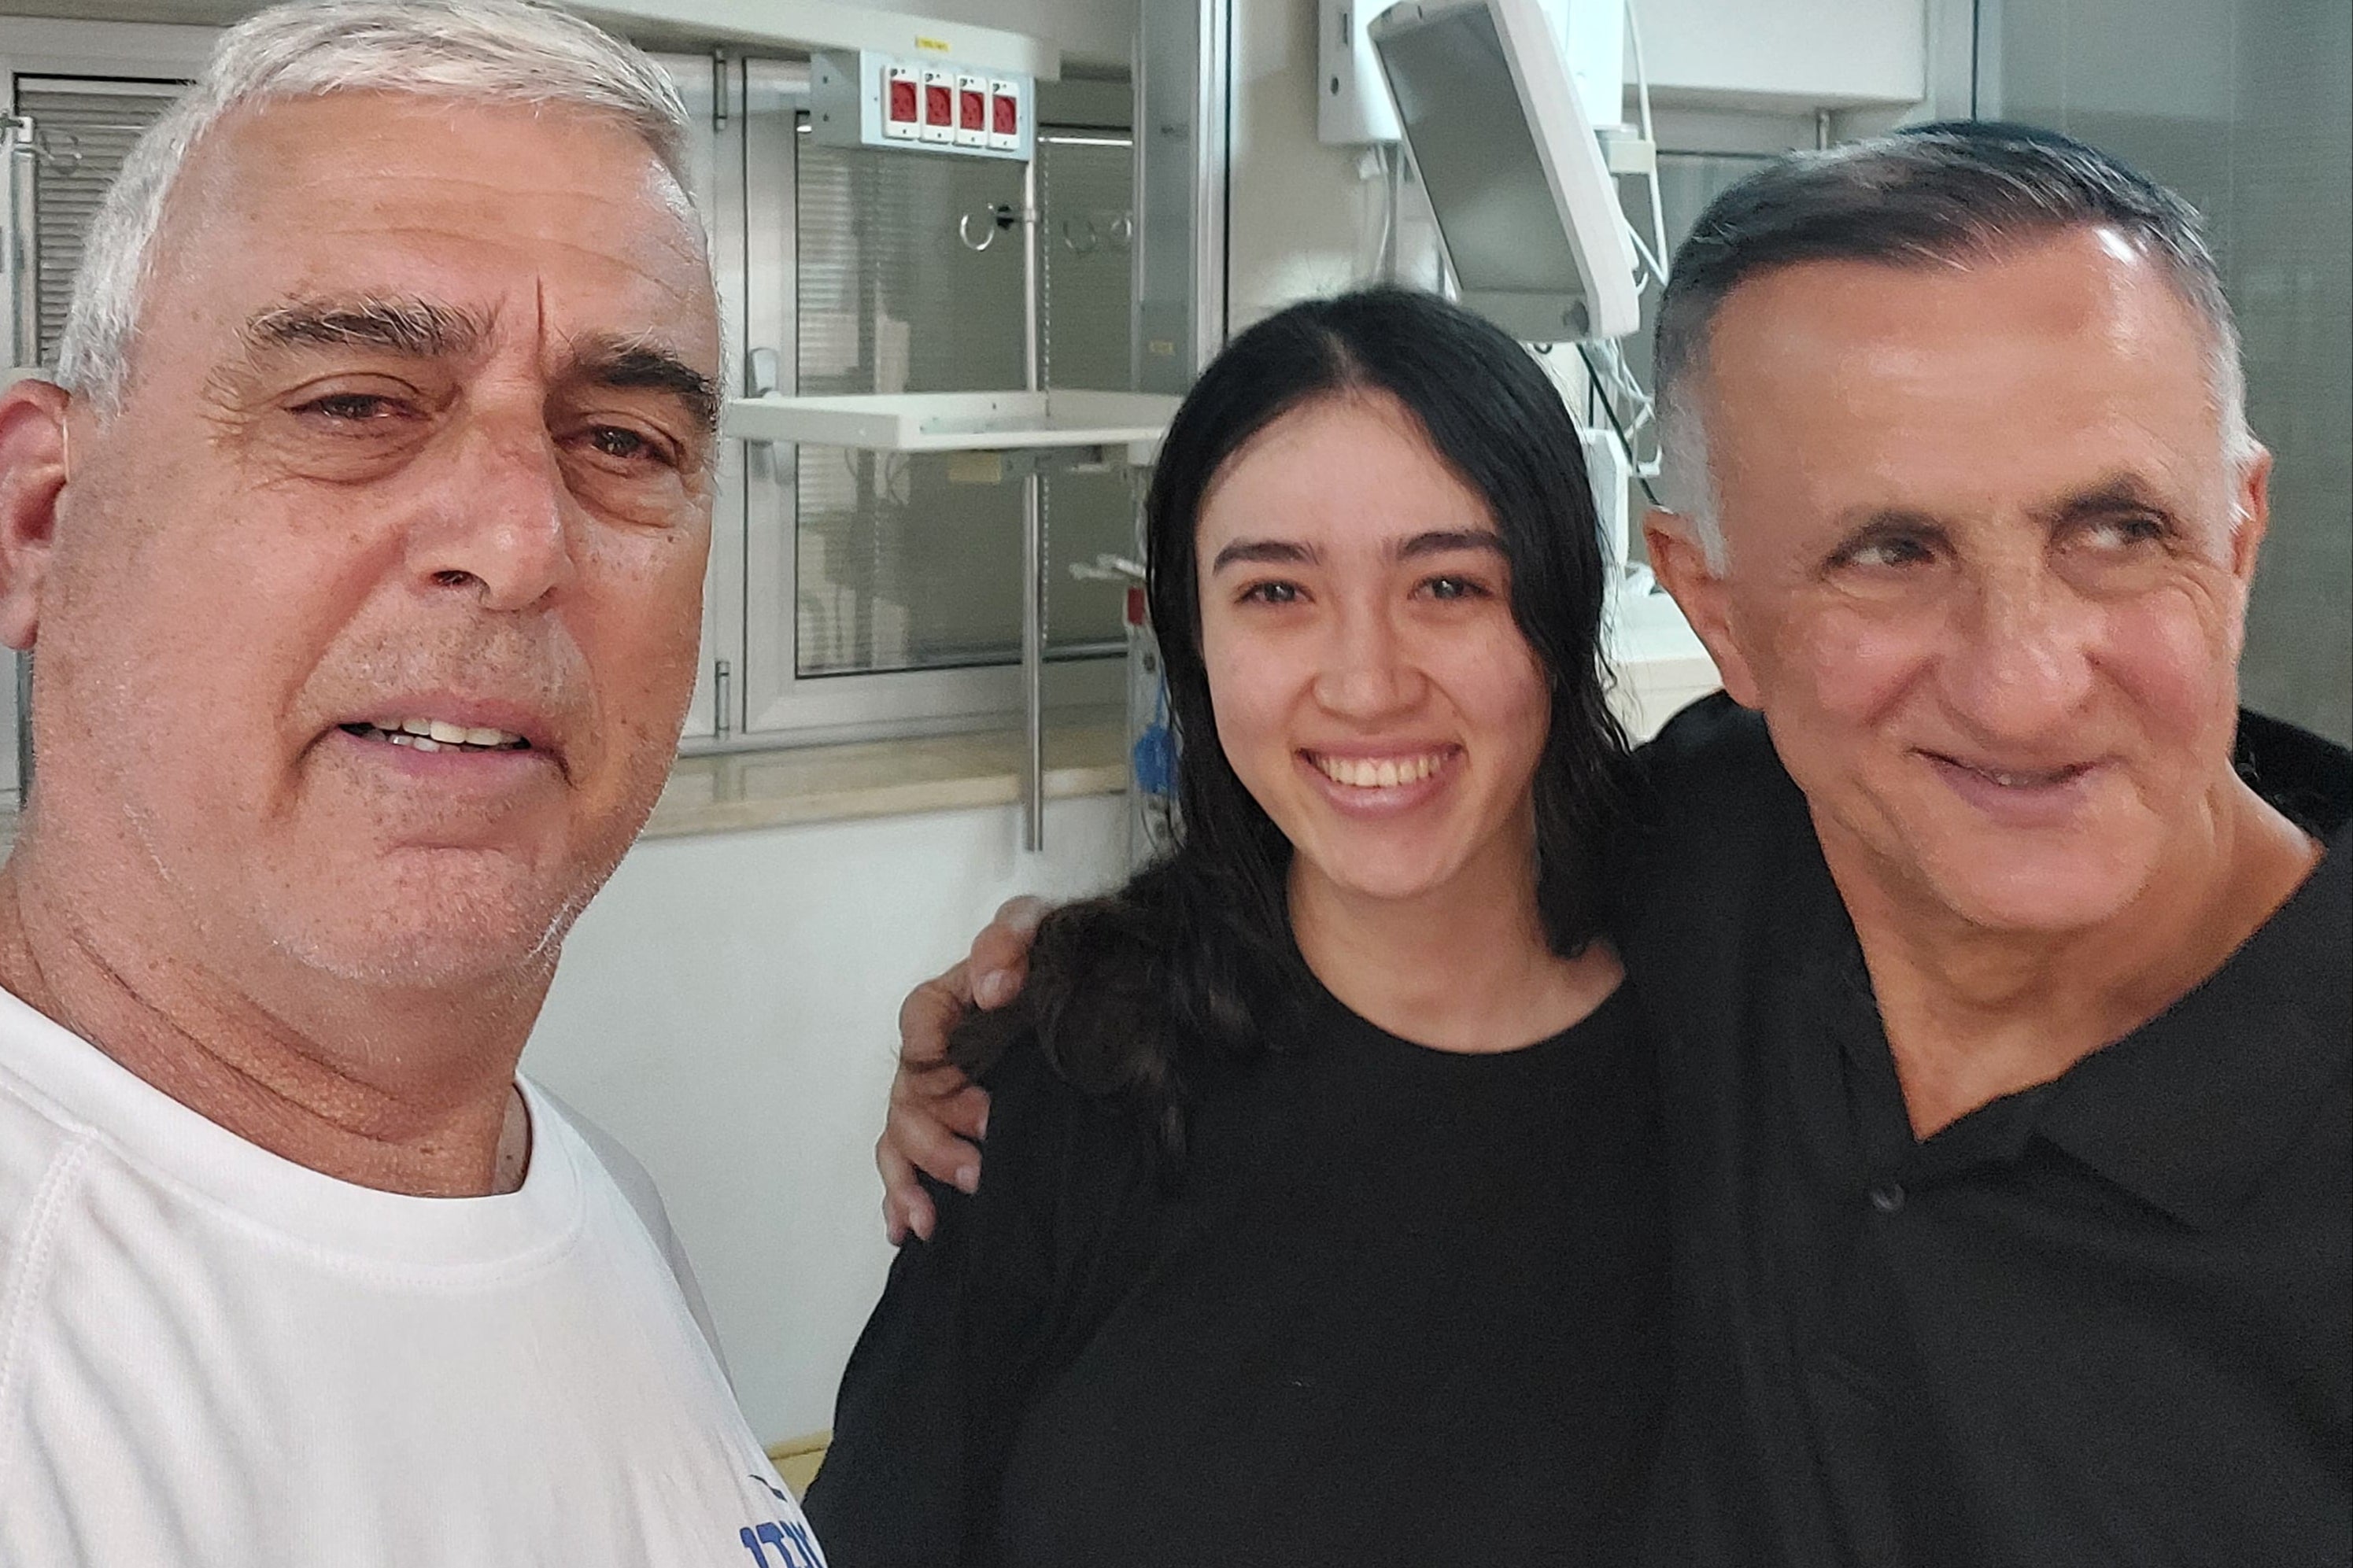 Noa Argamani stands with her father Yakov (right) and a family friend, Nir Givon, in Ramat Gan, Israel